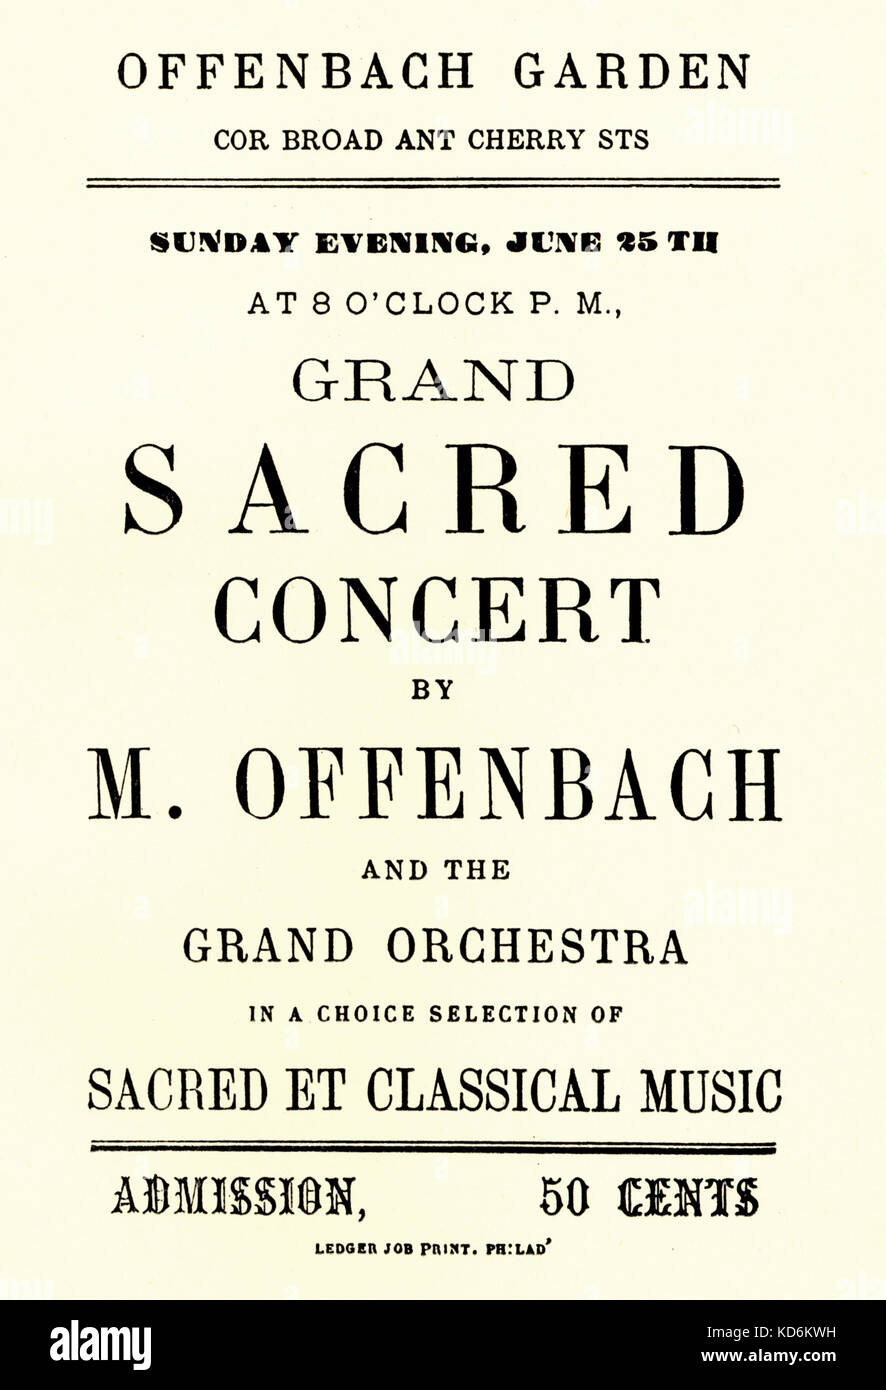 Jacques Offenbach - concert programme Offenbach Gardens, New York.  'Grand Sacred Concert by M. Offenbach and the Grand Orchestra in a choice of Sacred and Classical Music. Admission: 50 cents'.  German/French composer, 20 June 1819 - 5 October 1880. Stock Photo